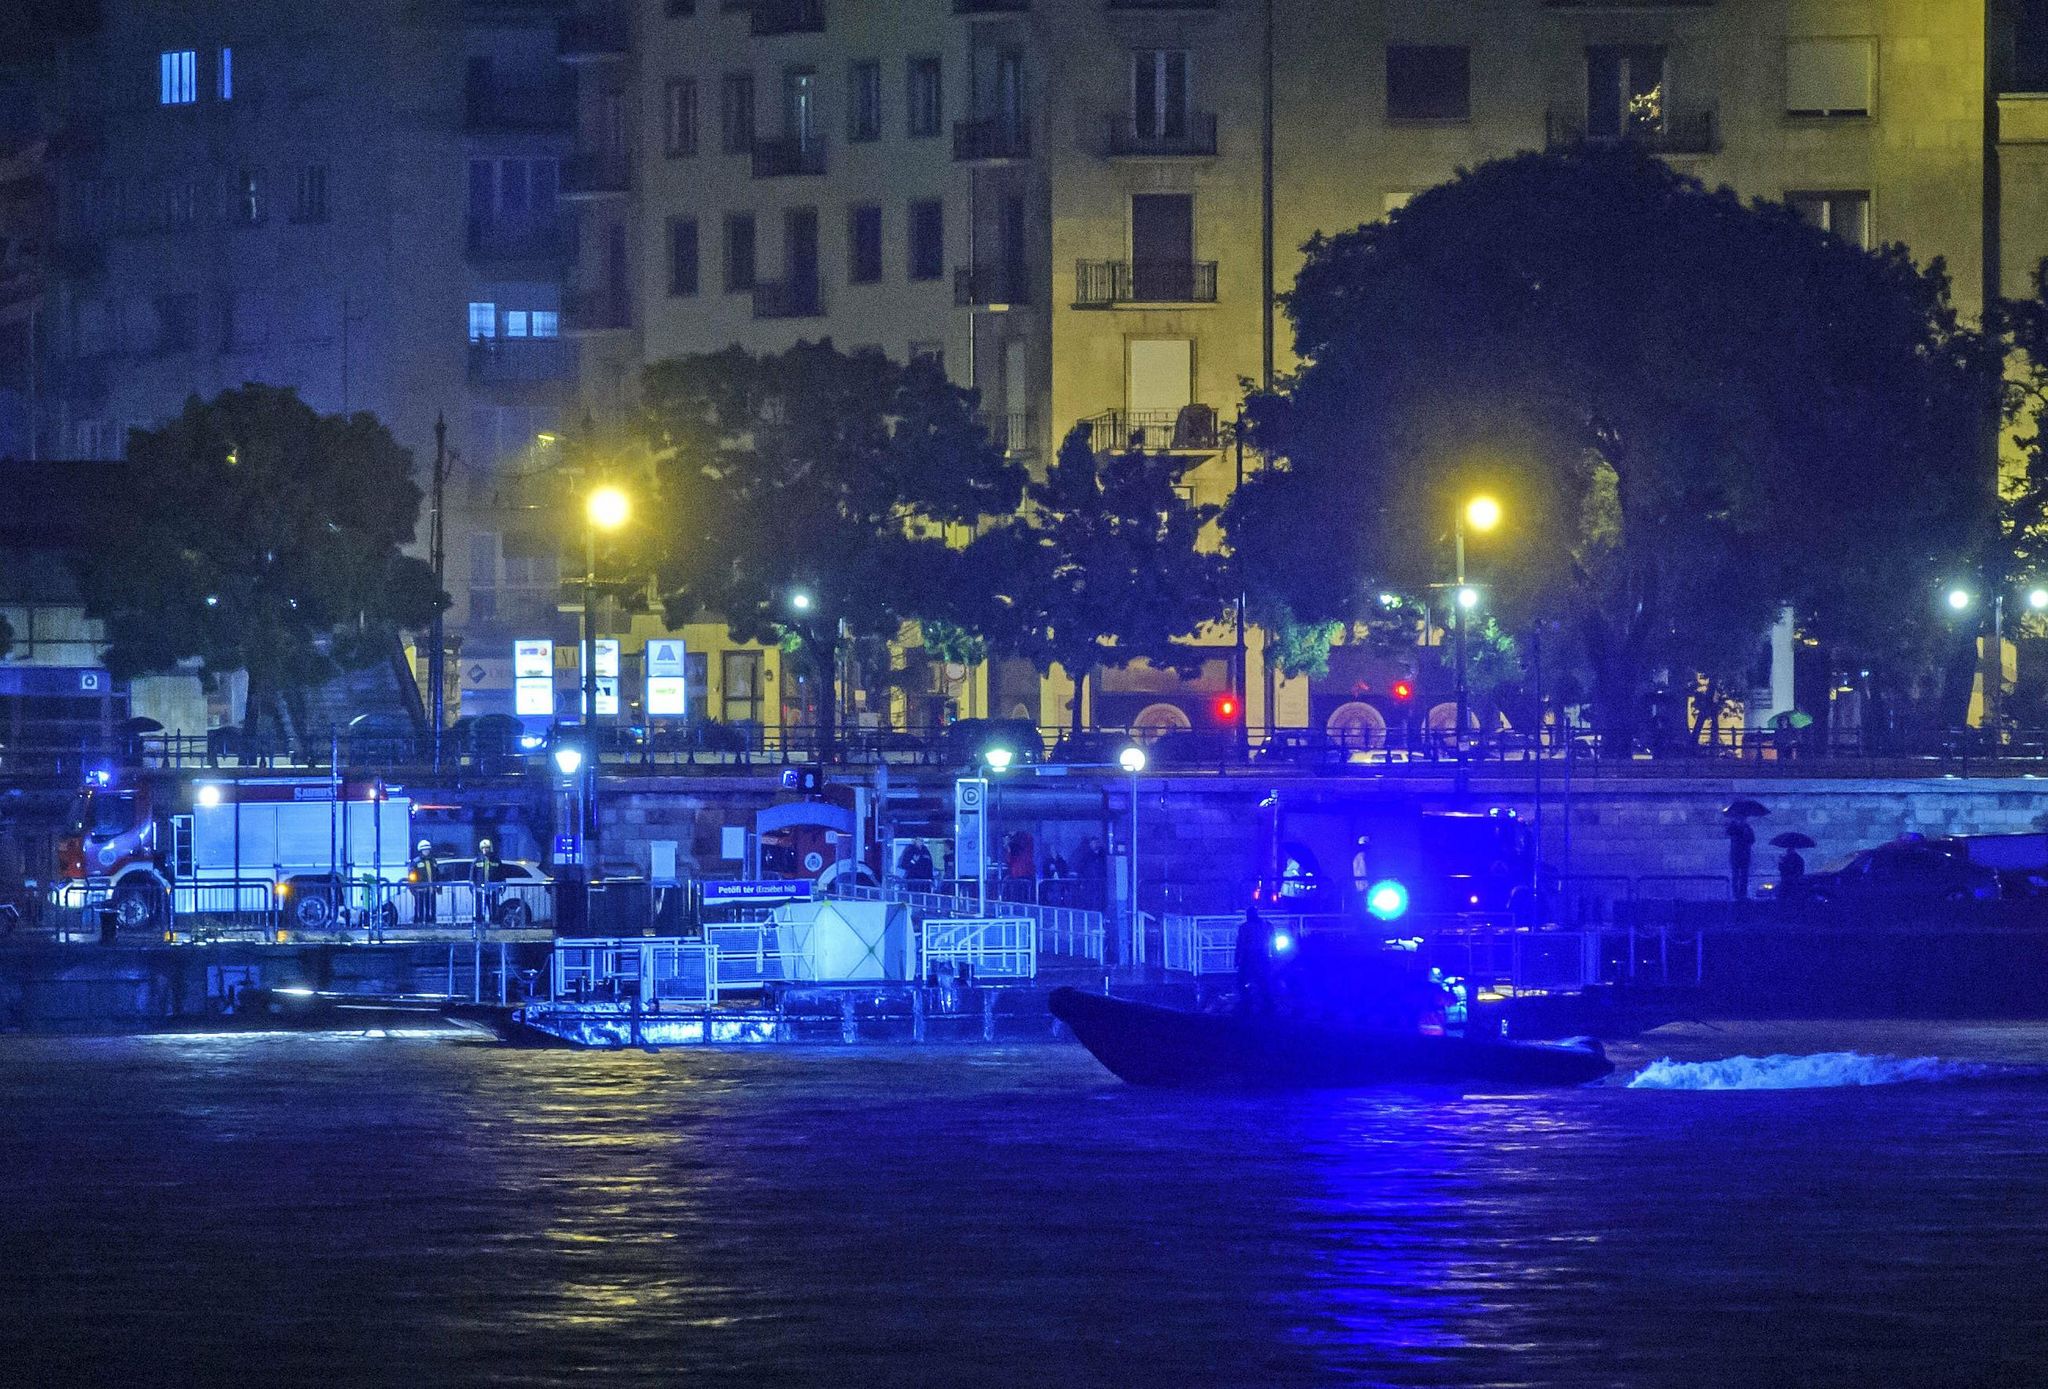 7 Confirmed Dead, 21 Missing After Boar With South Korean Tourists Sinks In Danube | Classic ...